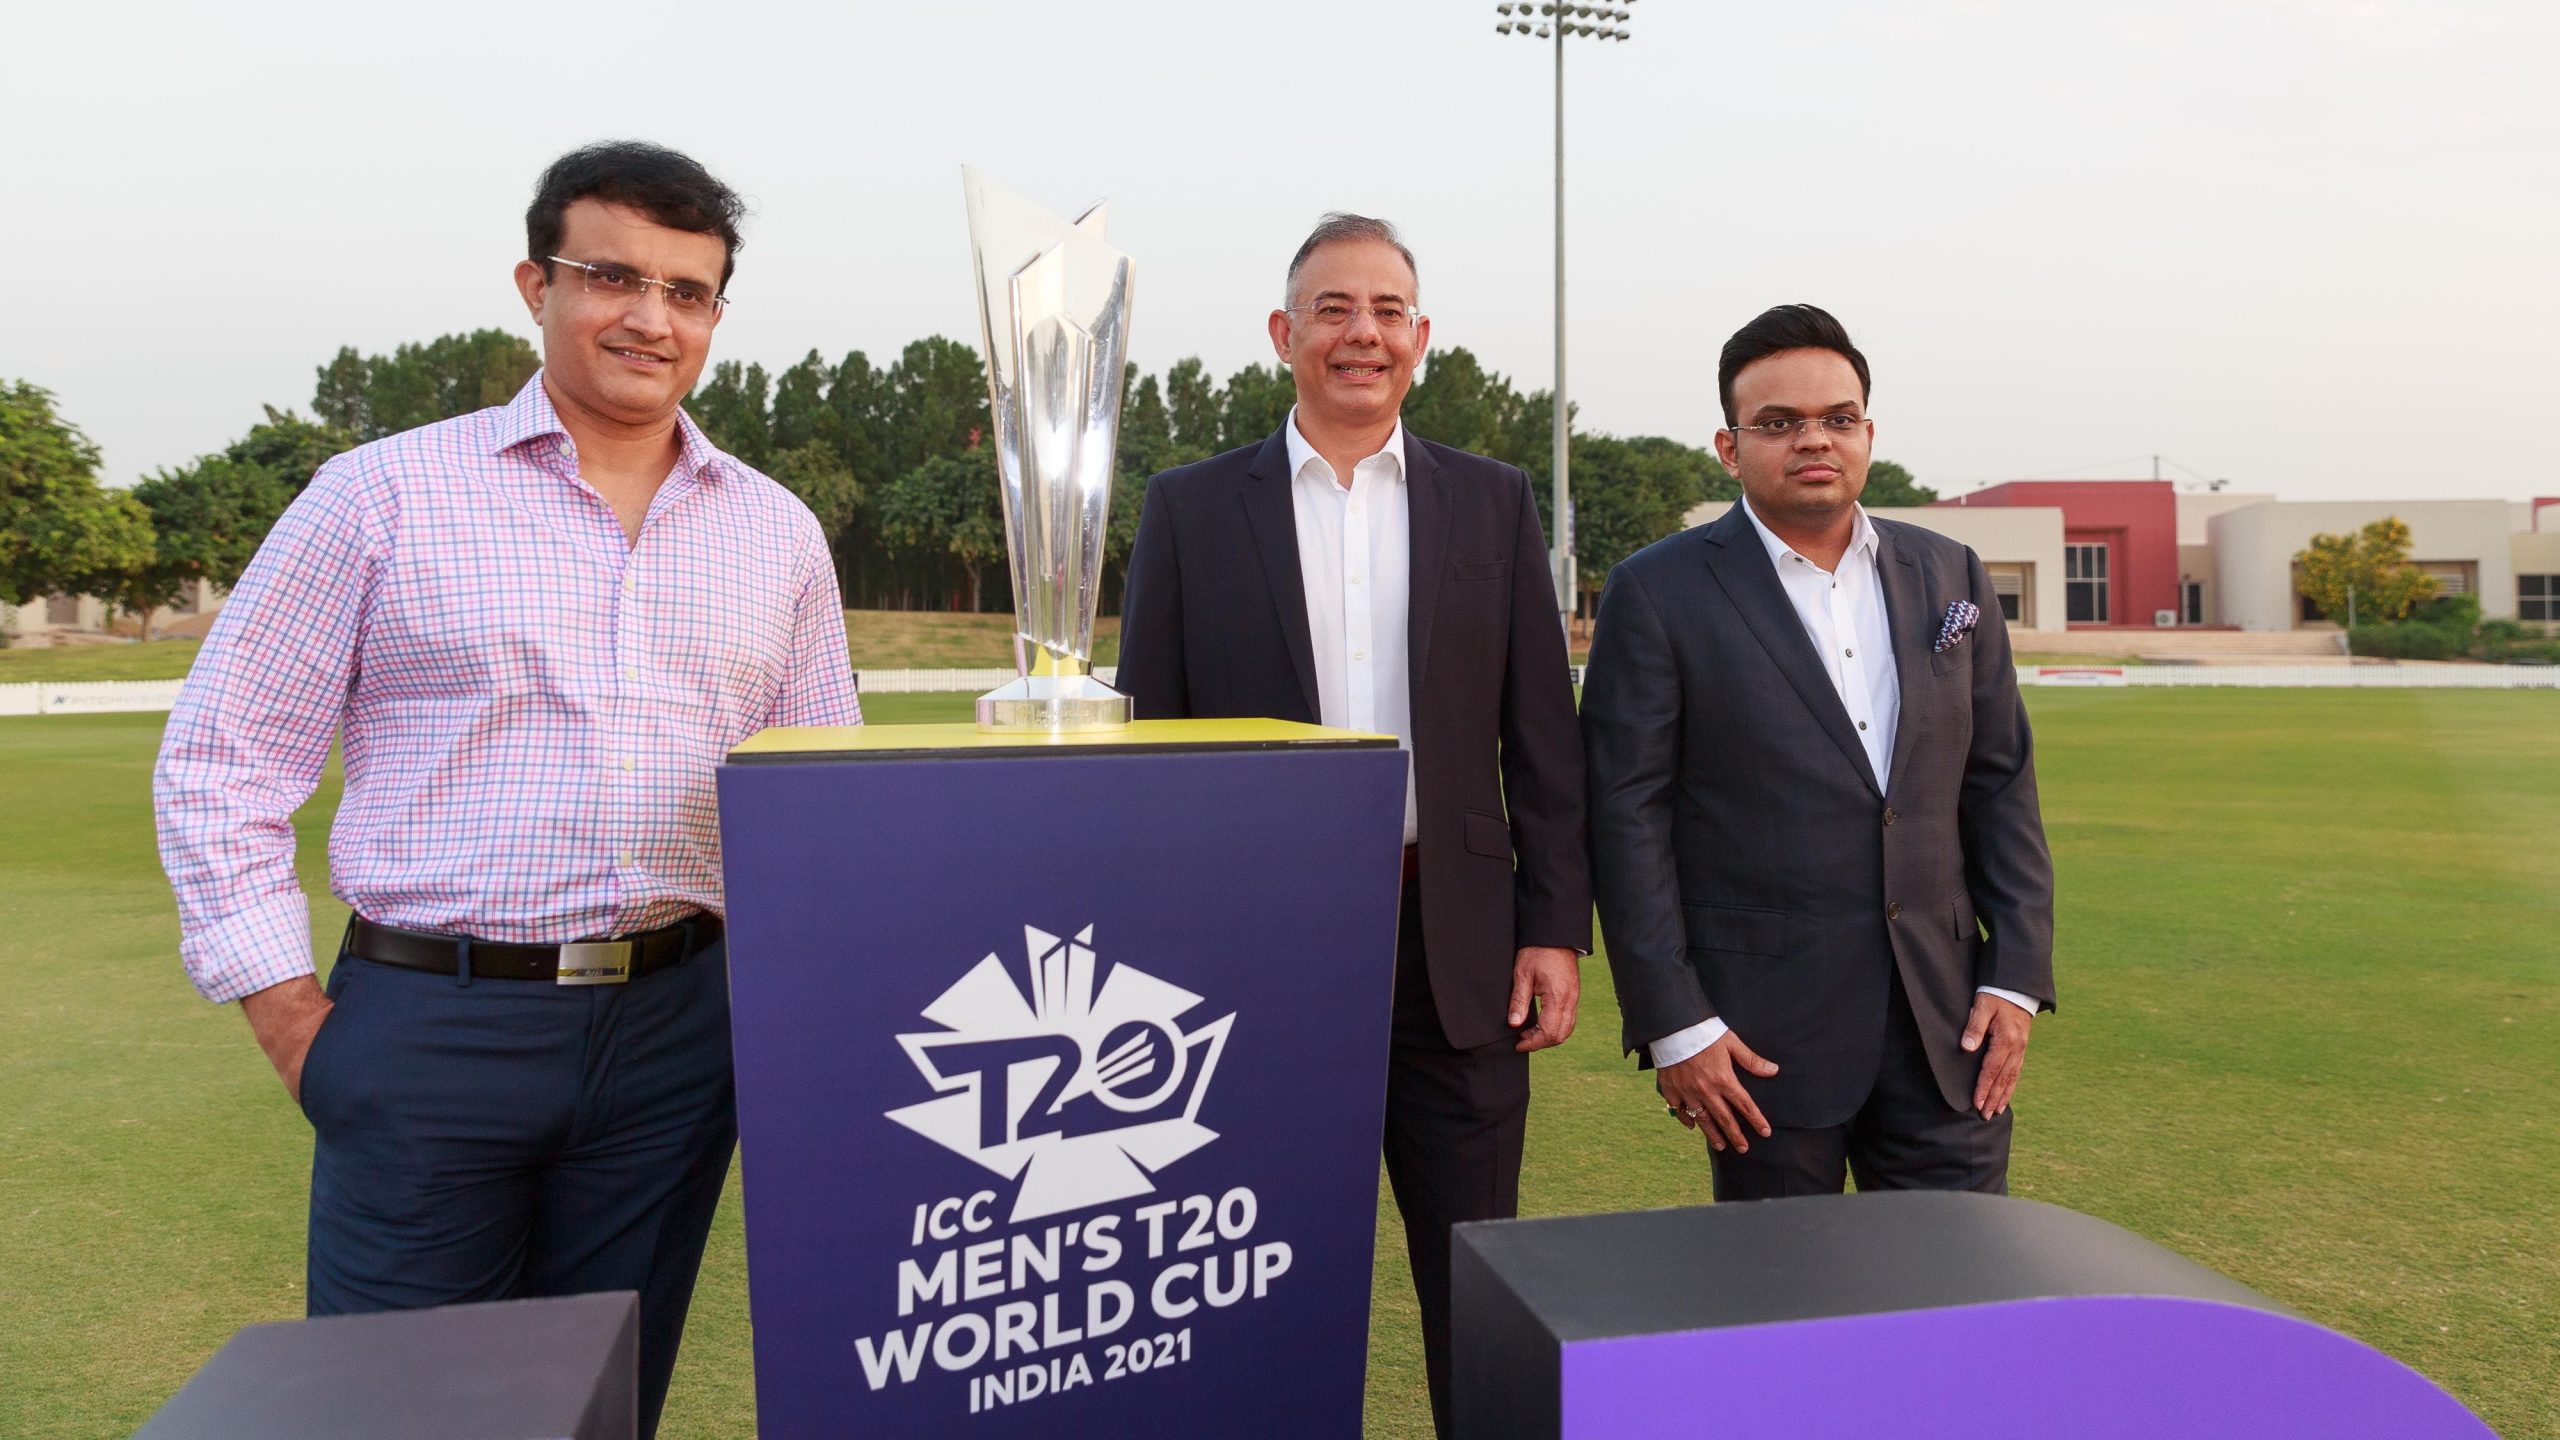 t20 world cup 2021 trophy, T20 World Cup 2021 uae